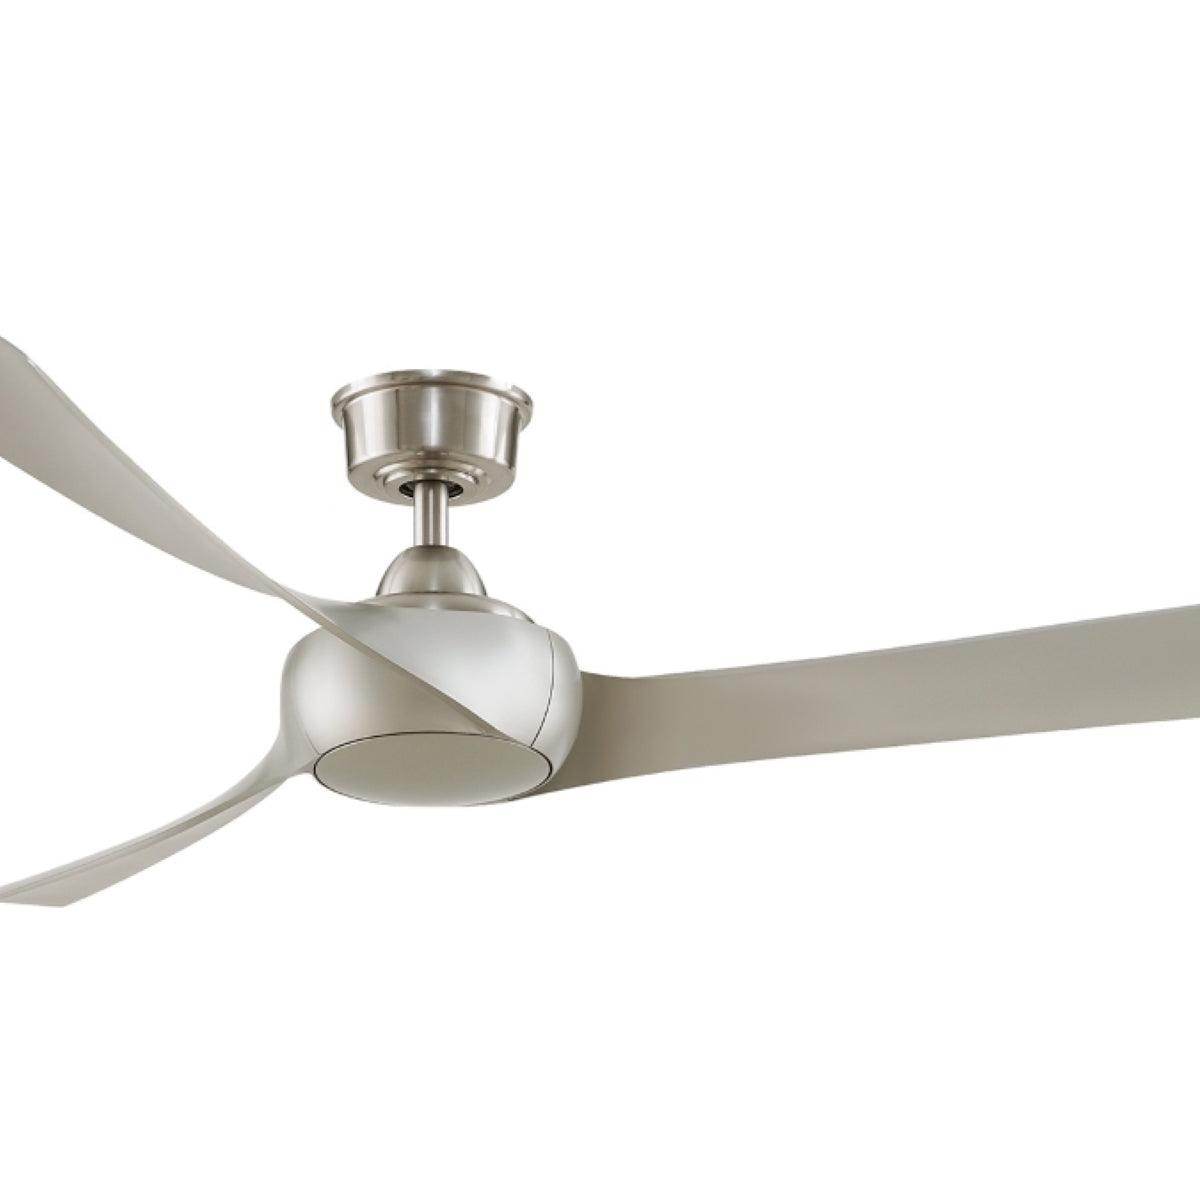 Wrap Custom Indoor/Outdoor Ceiling Fan Motor With Remote, Brushed Nickel Finish, 44-60" Blades Sold Separately - Bees Lighting